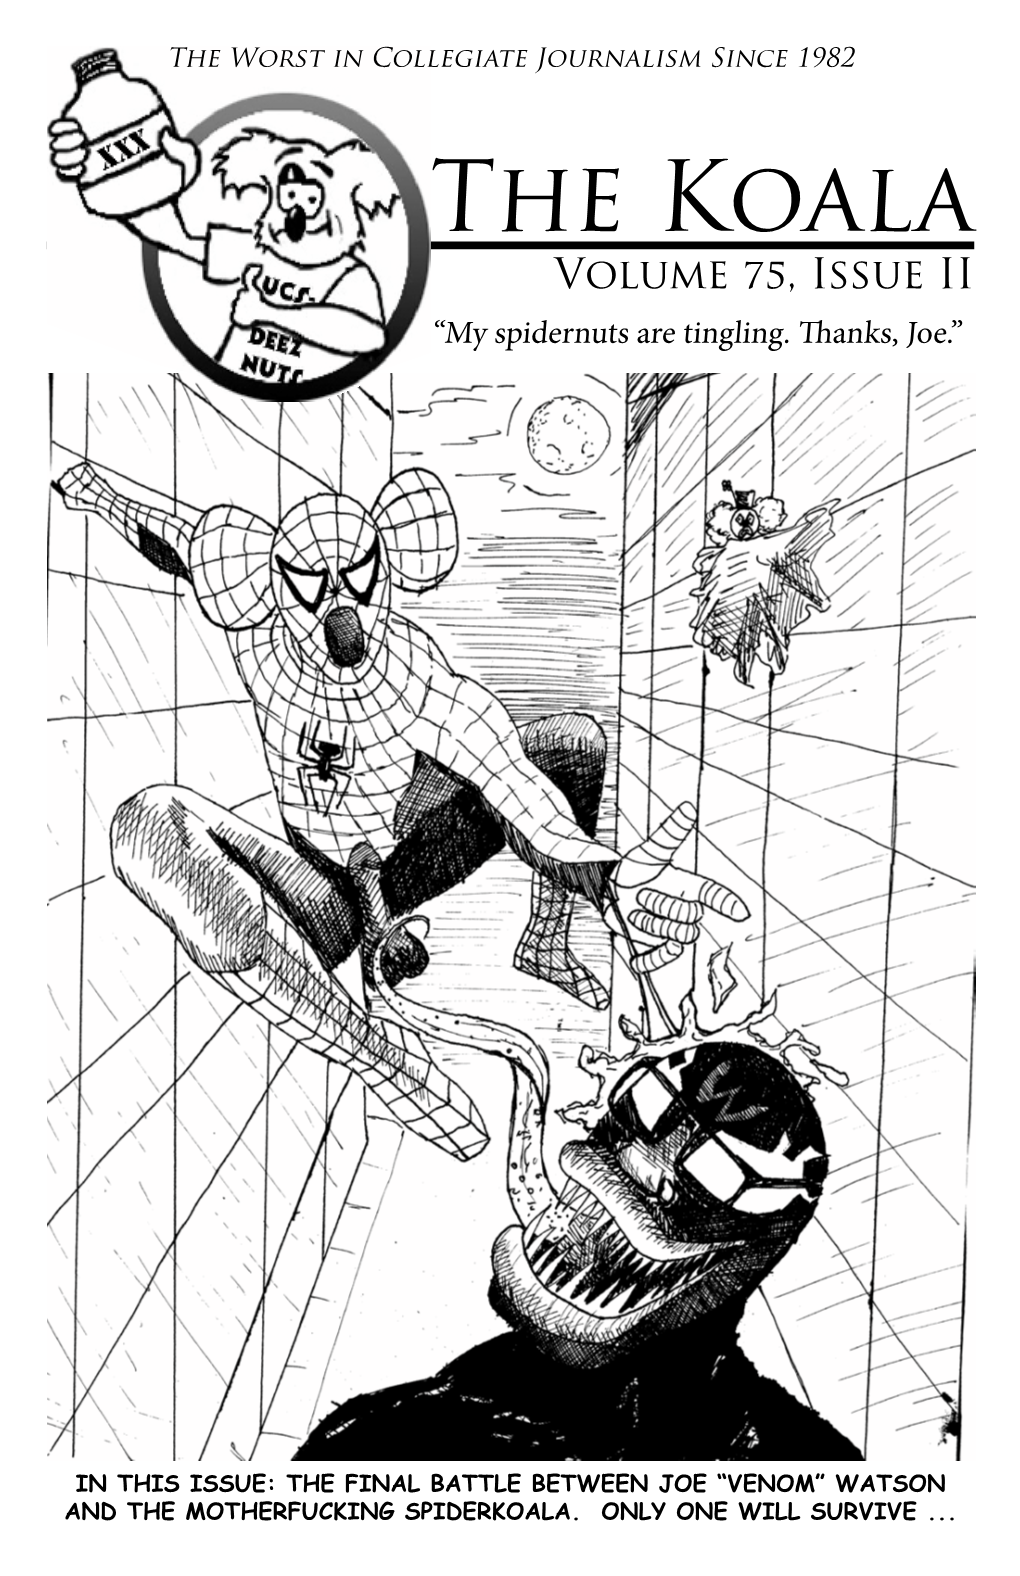 Volume 75, Issue II “My Spidernuts Are Tingling